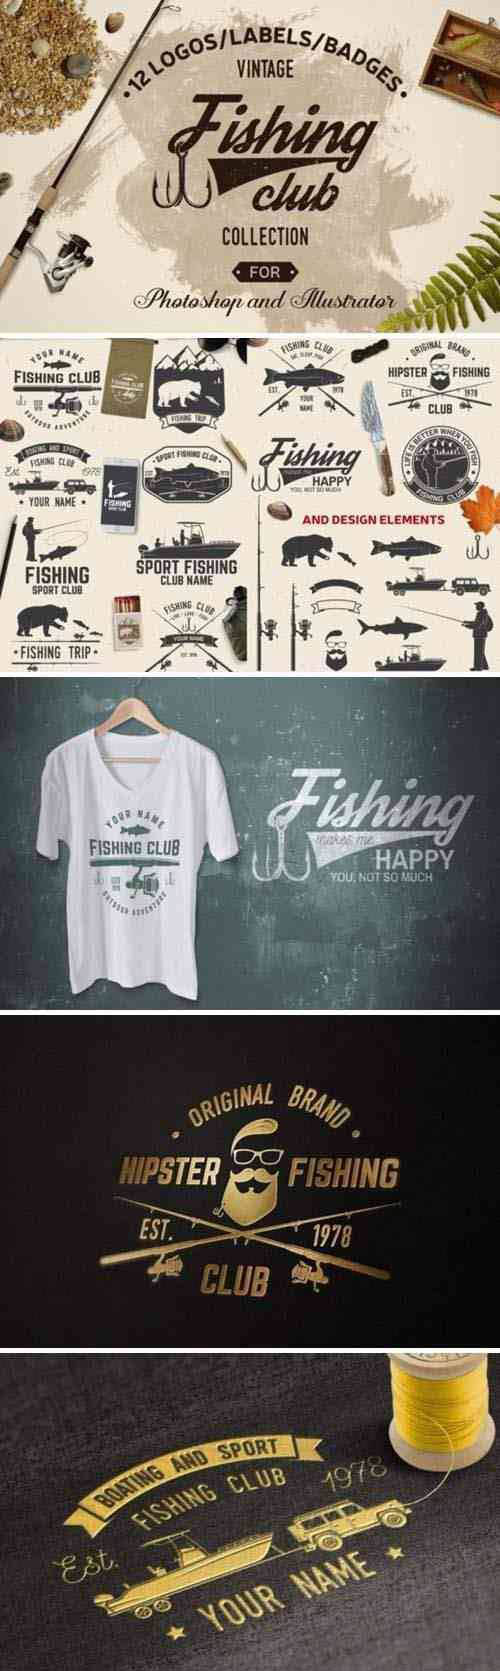 Fishing Club Vintage Collection 2775259